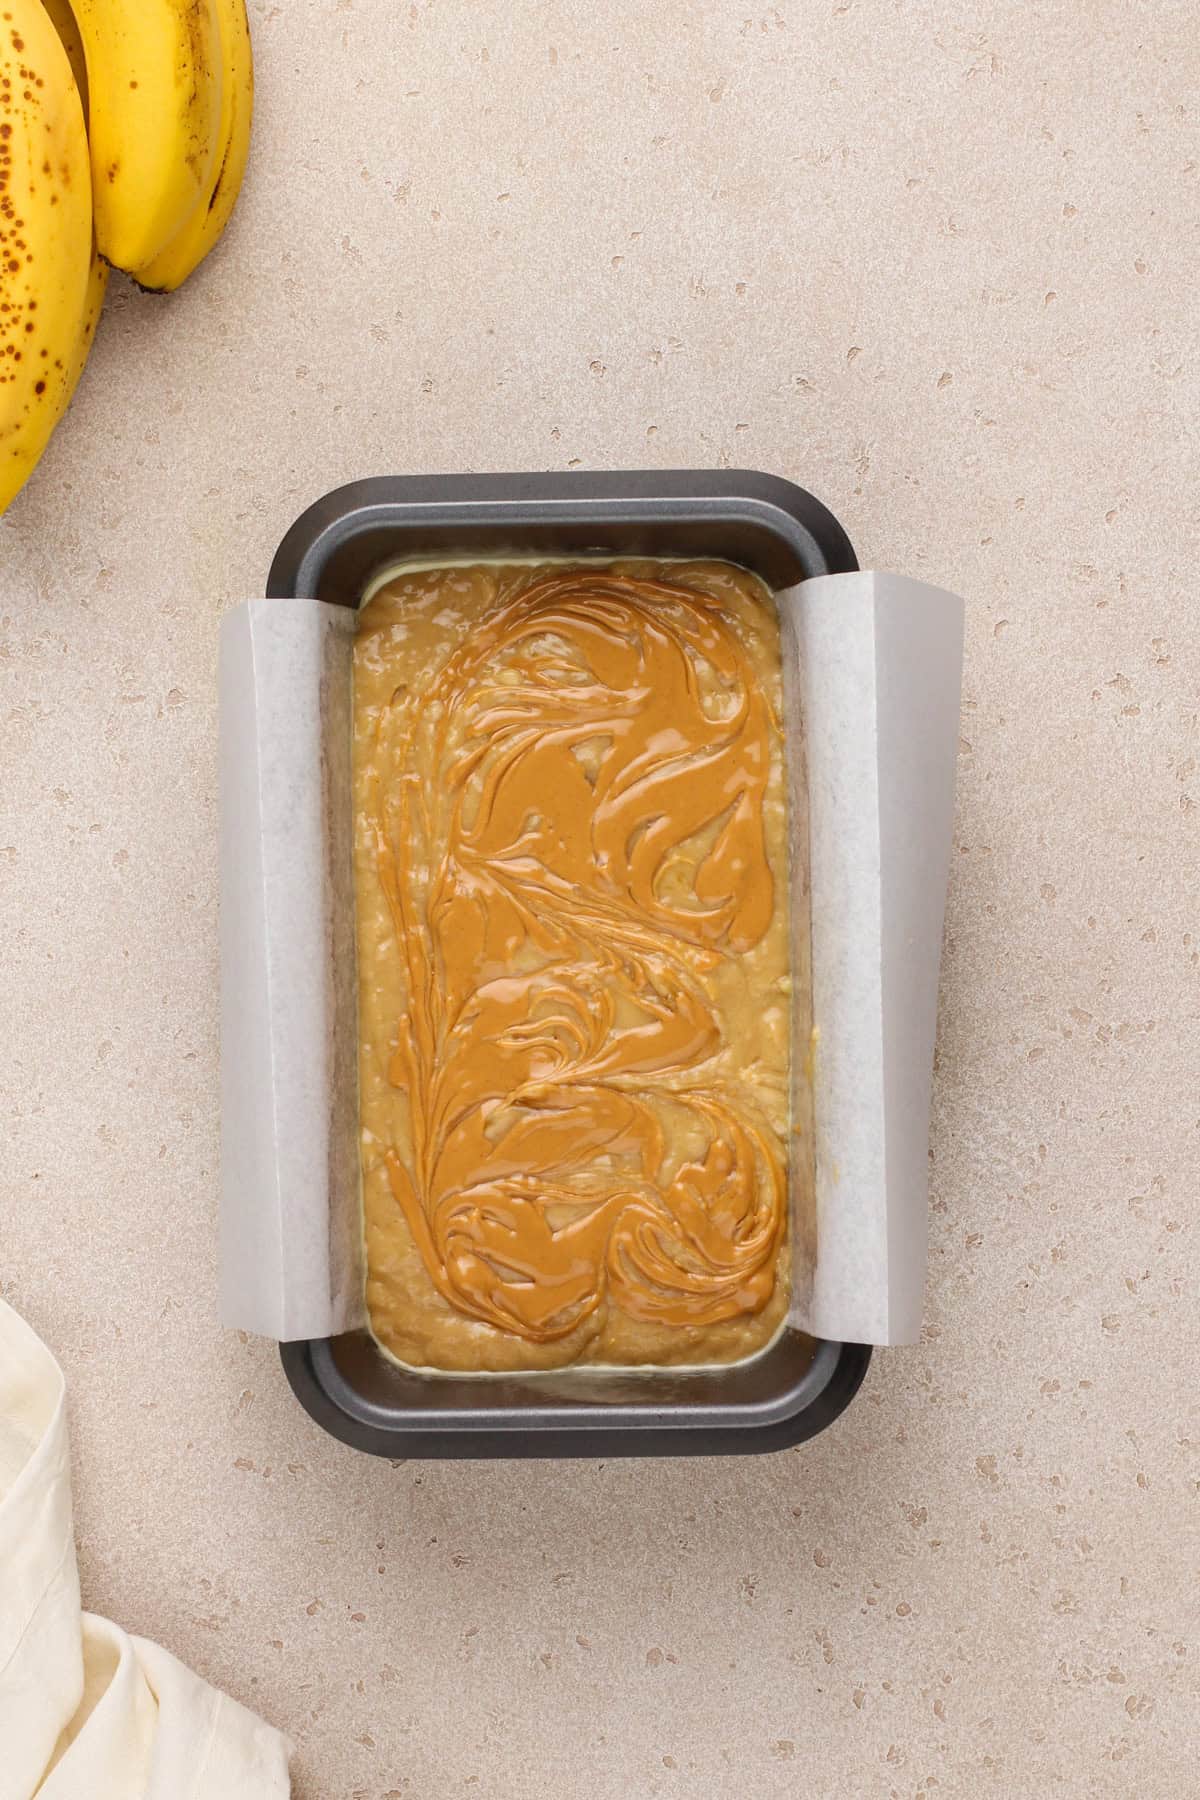 Peanut butter swirled into the top of peanut butter banana bread batter in a loaf pan.